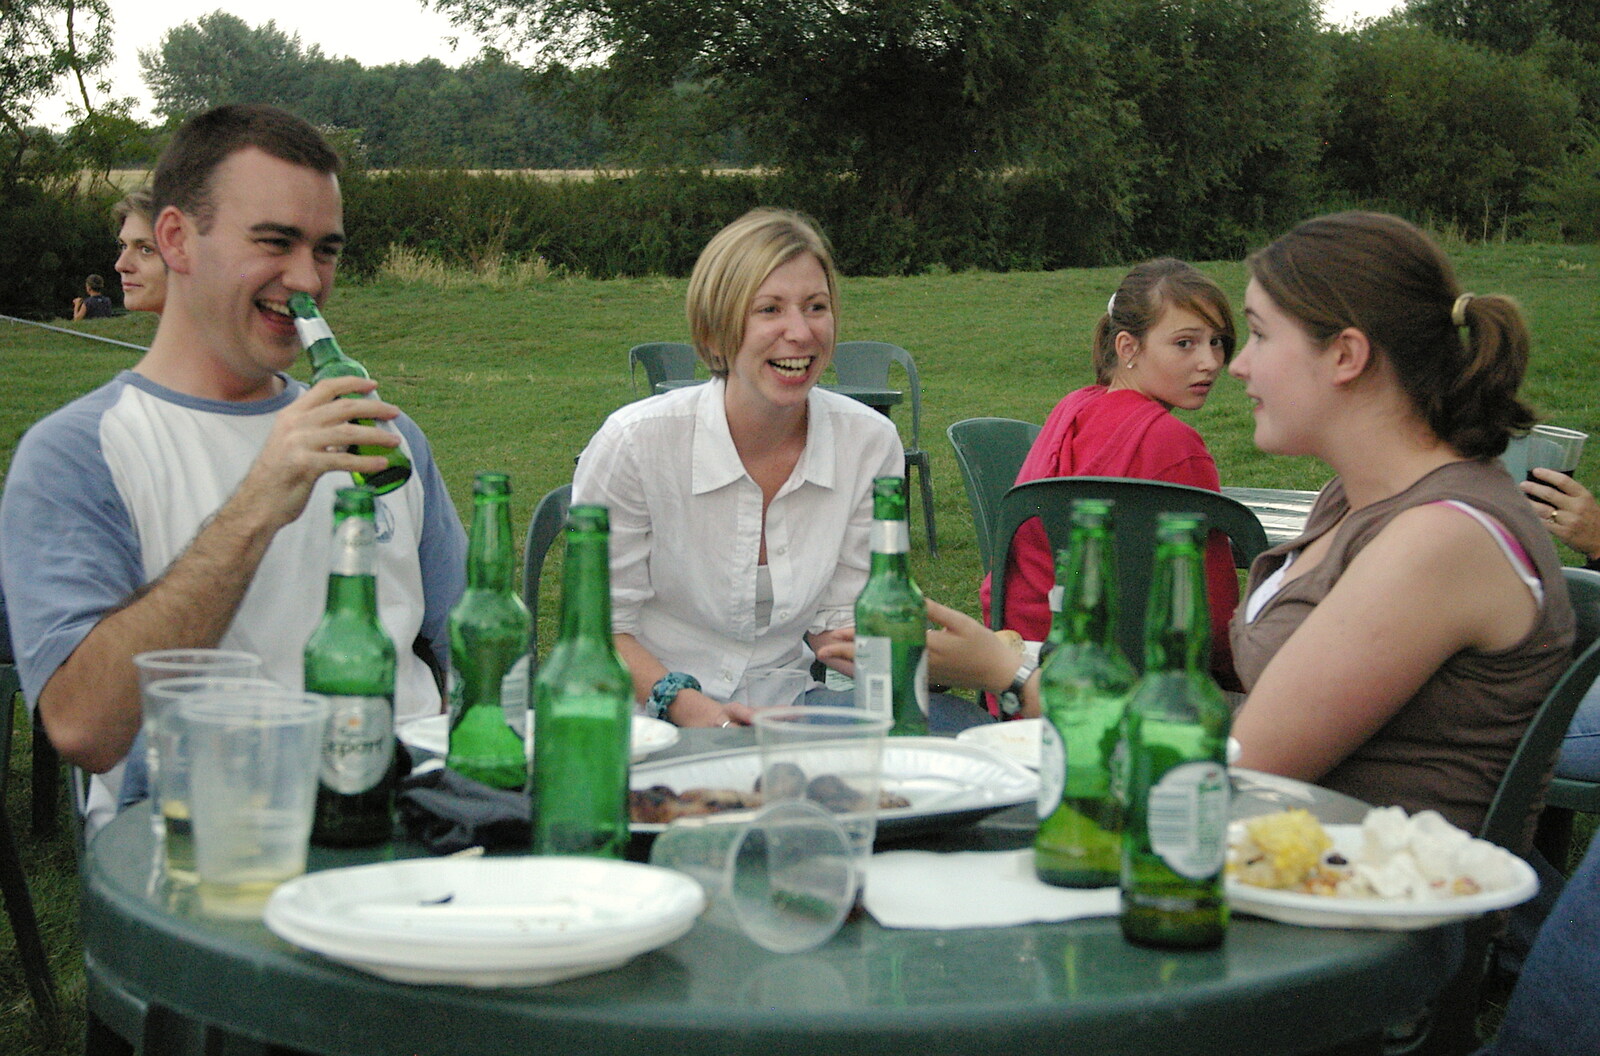 James, Lucy and Isobel from Qualcomm goes Punting on the Cam, Grantchester Meadows, Cambridge - 18th August 2005